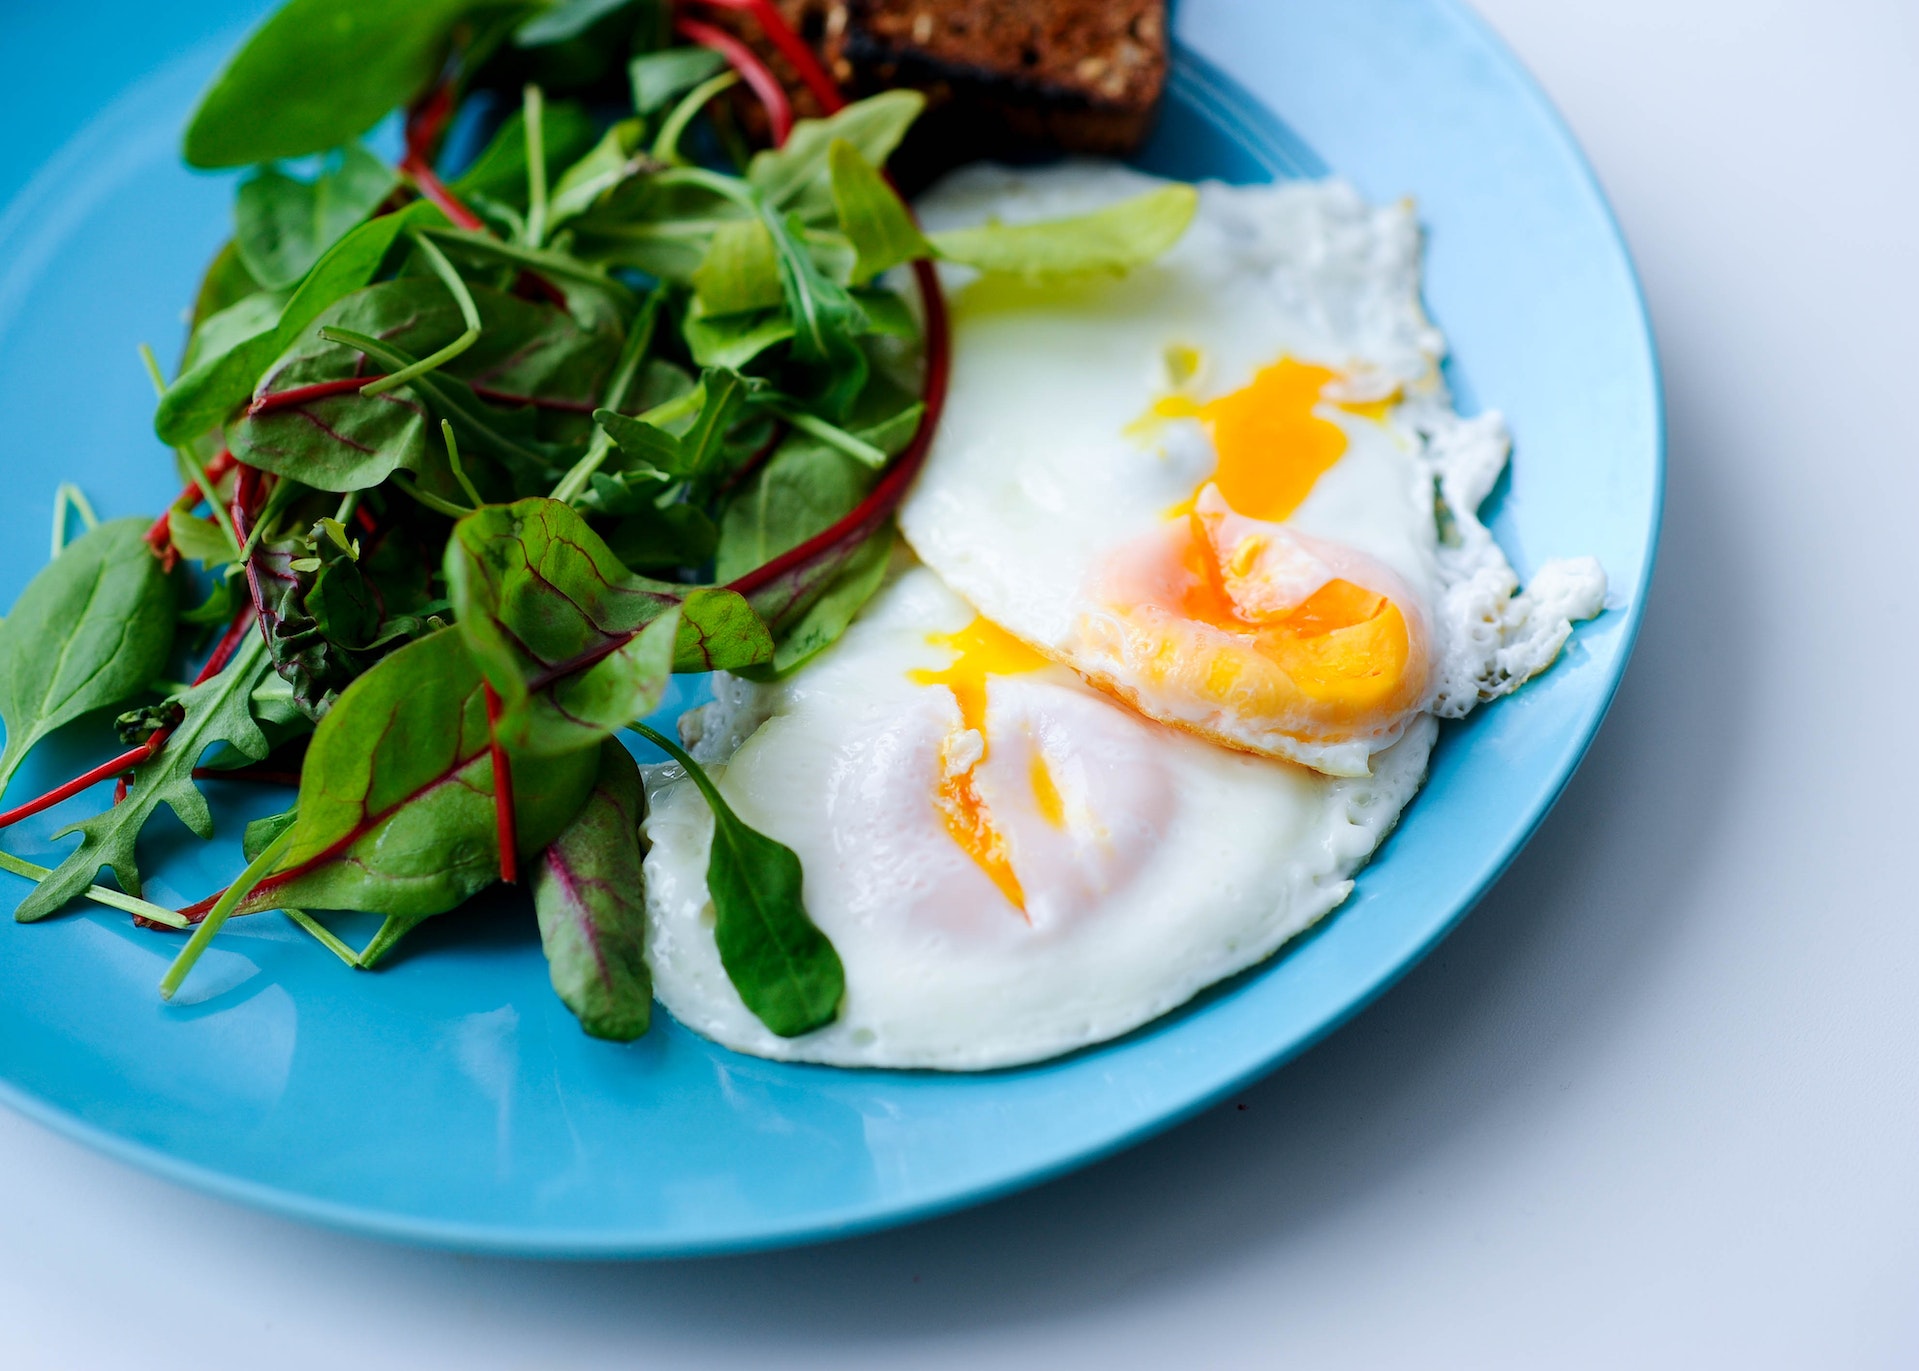 Spinach and egg on a plate